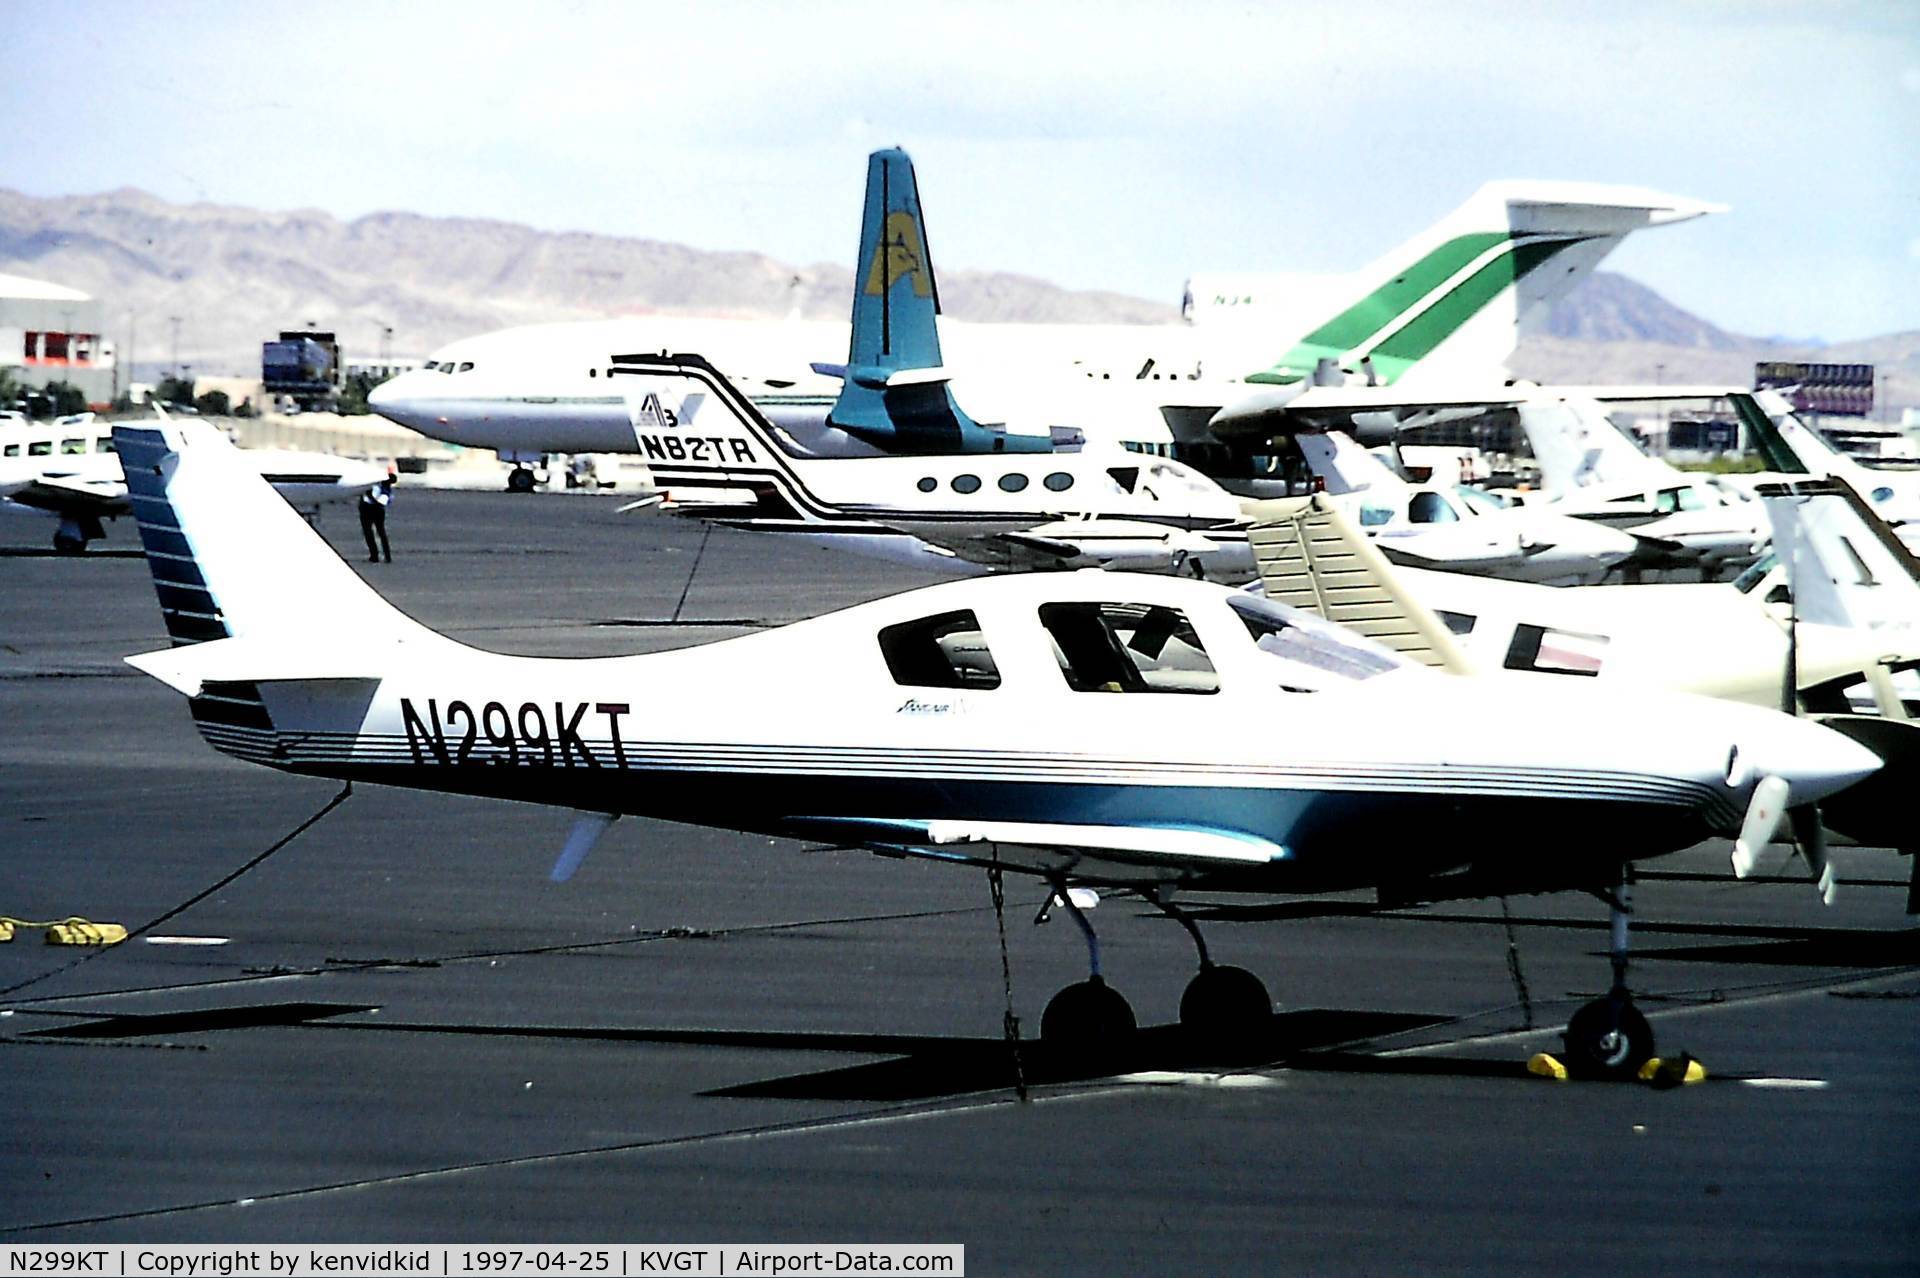 N299KT, 1996 Lancair IV-P C/N 139, At North Las Vegas Airport prior to attending the Golden Air Tattoo at Nellis.